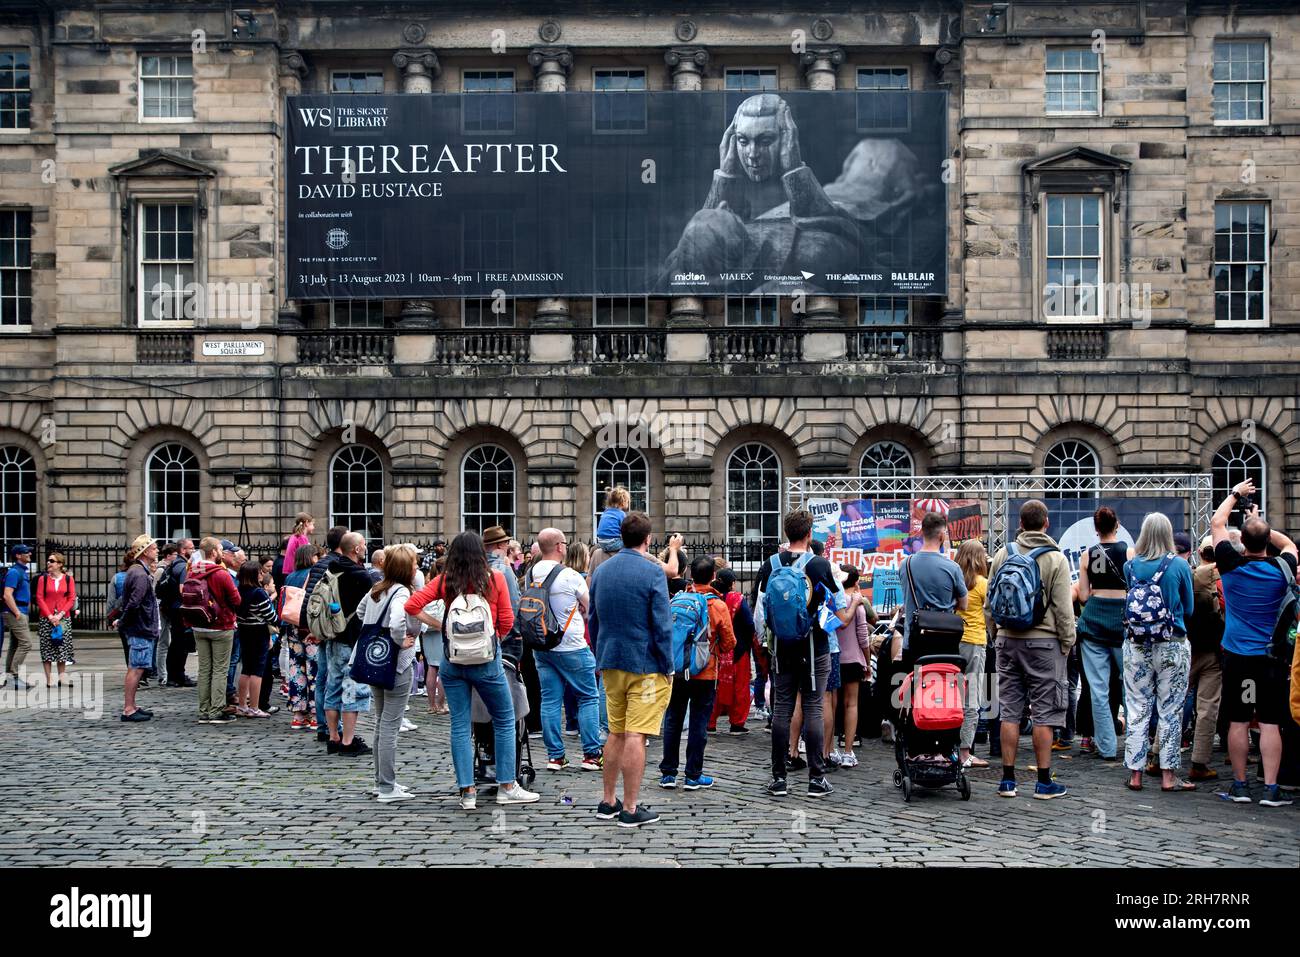 Rear view of audience watching a street performer with a banner advertising a David Eustace Exhibition in the Signet Library, Edinburgh, Scotland, UK. Stock Photo